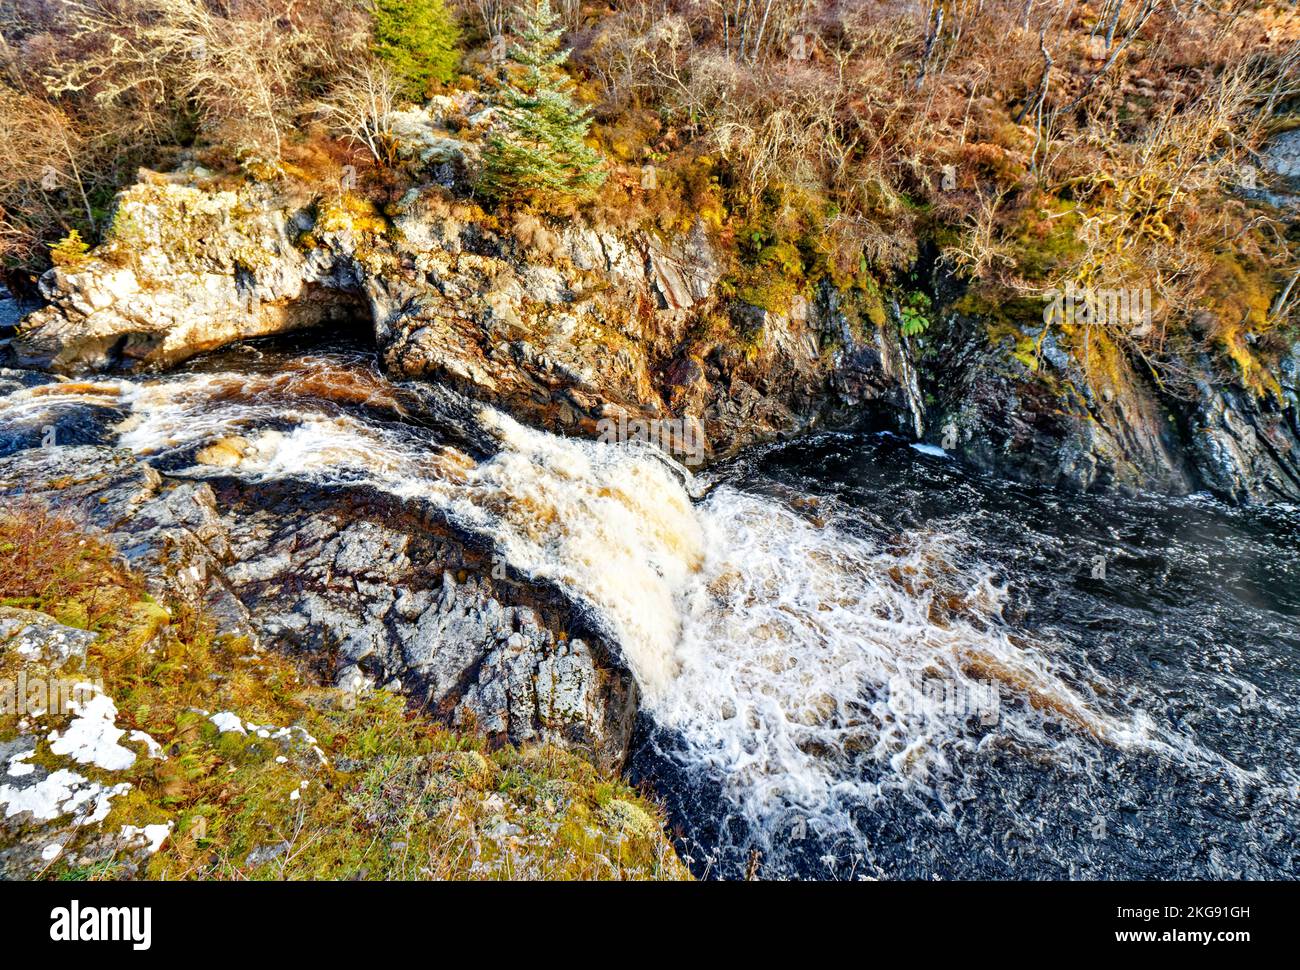 Falls of Shin River Shin Sutherland Scotland the upper river and falls on an autumn day Stock Photo